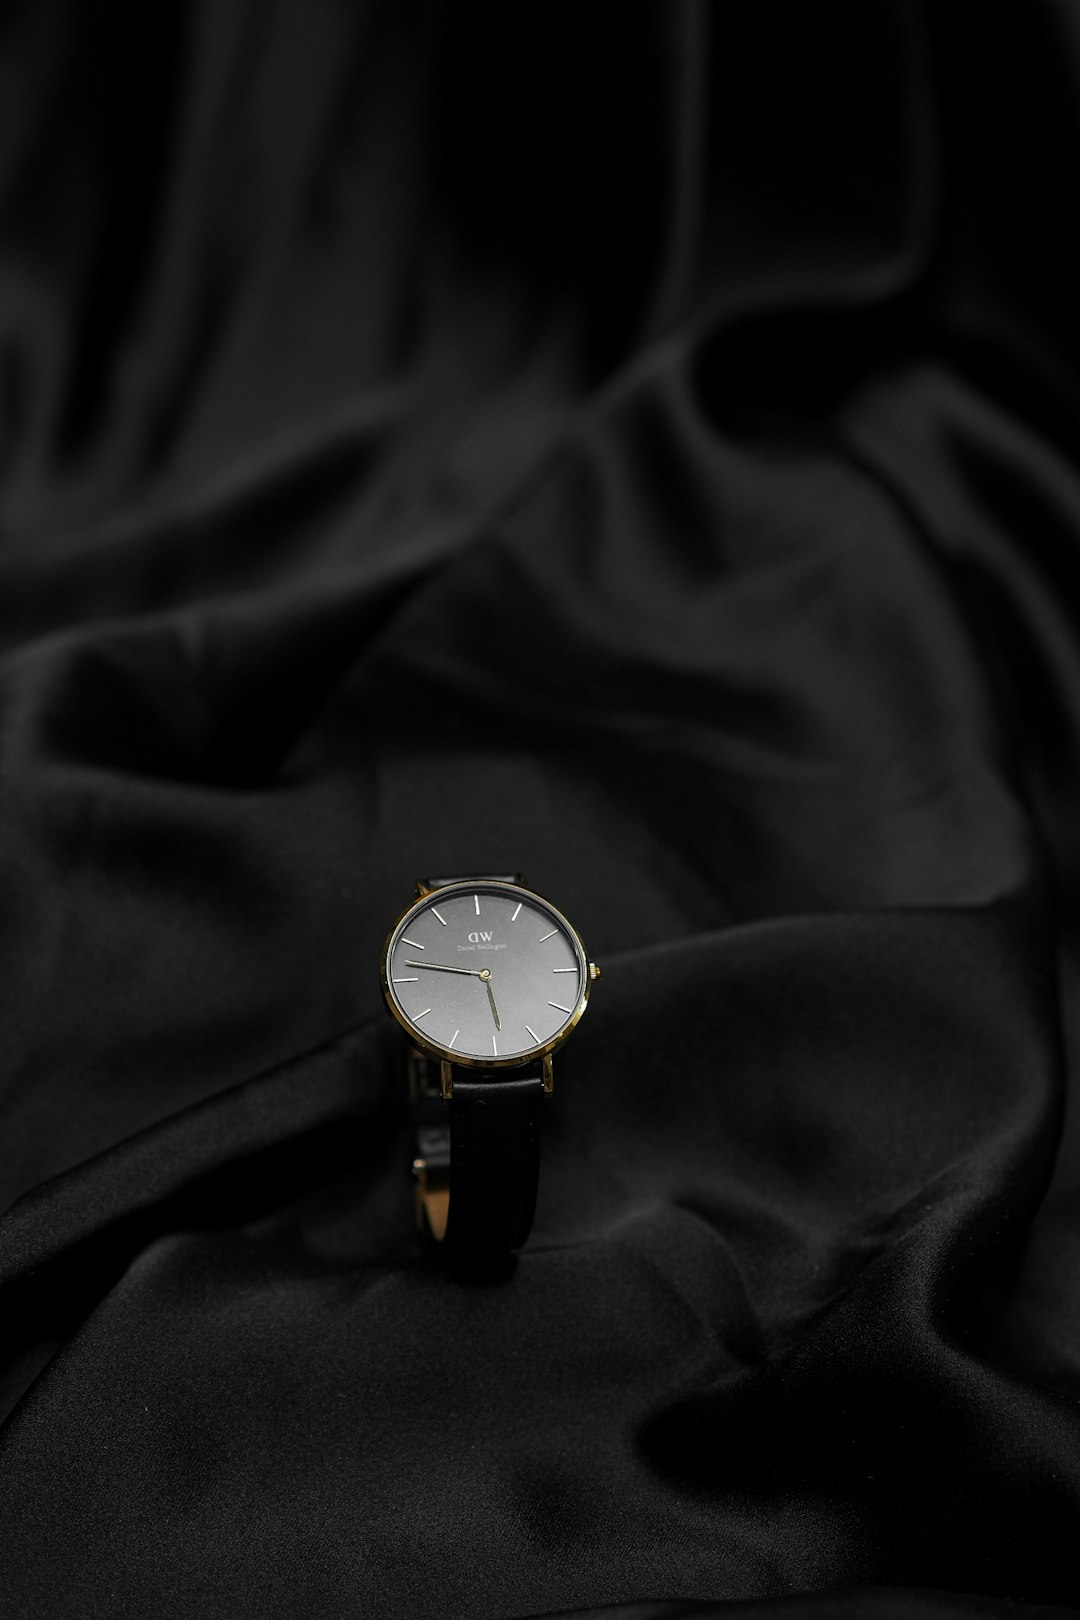 gold and black analog watch on black textile